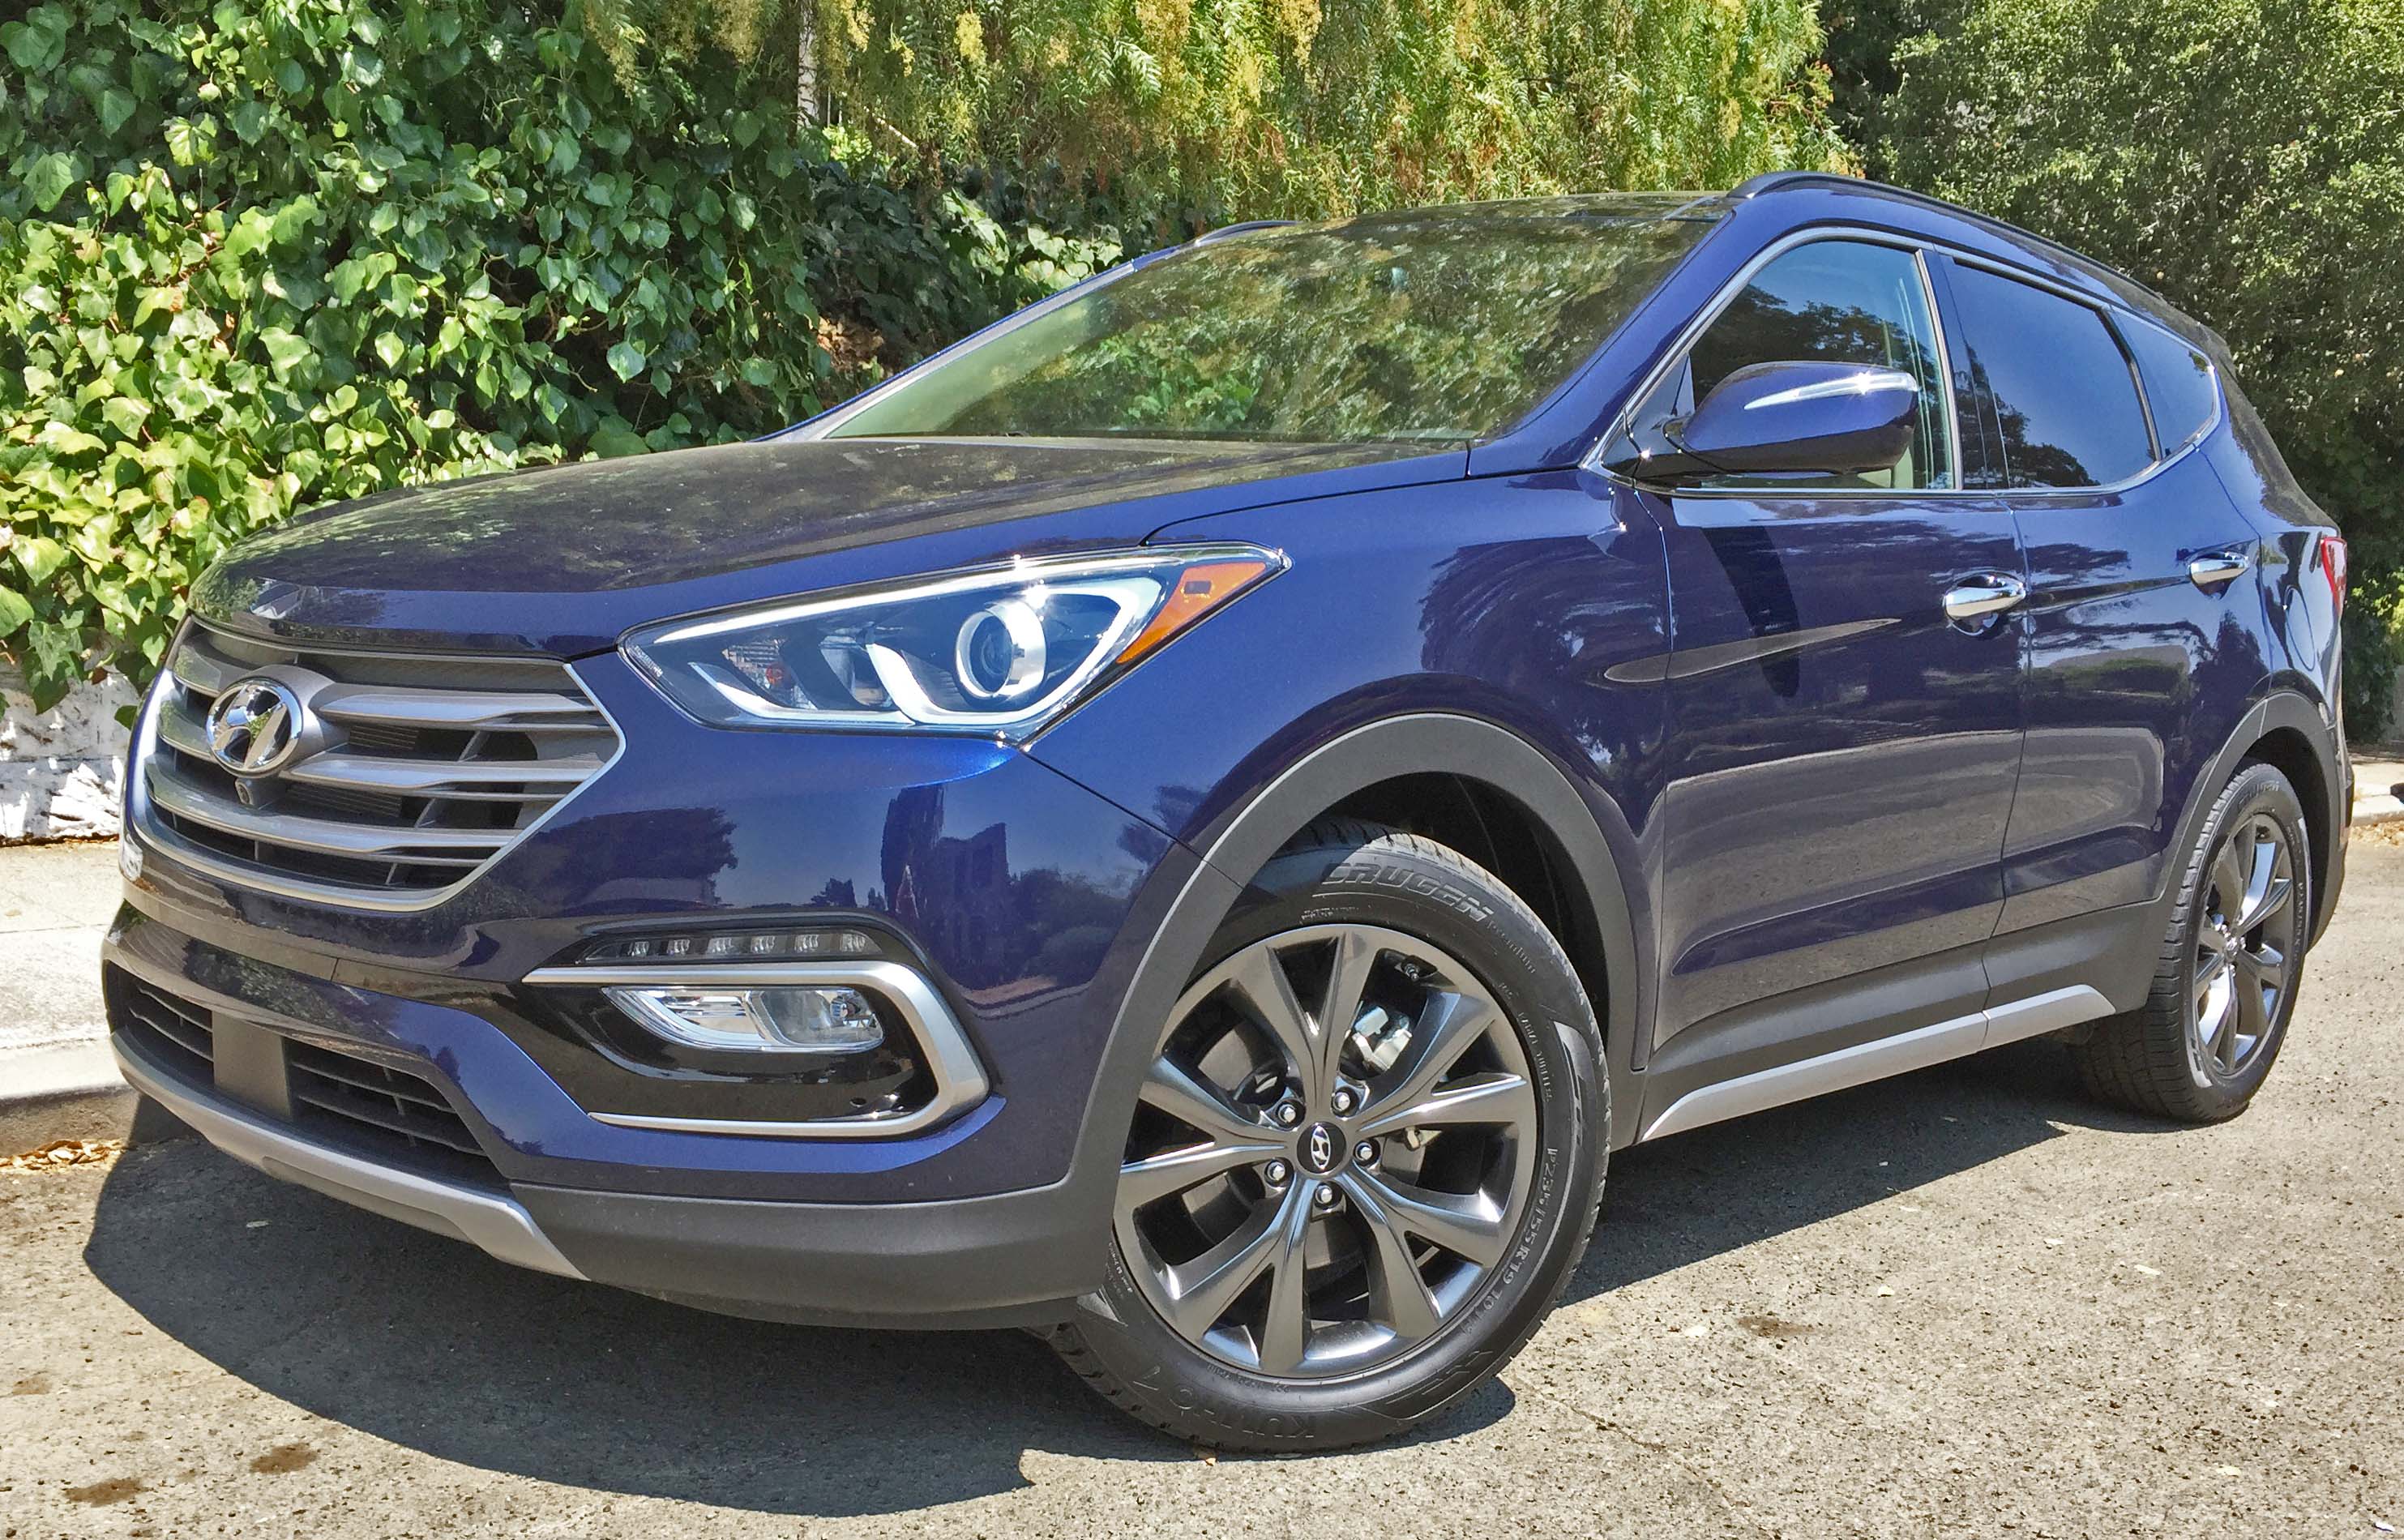 The 2018 Hyundai Santa Fe Sport 2.0T FWD Ultimate performs flawlessly